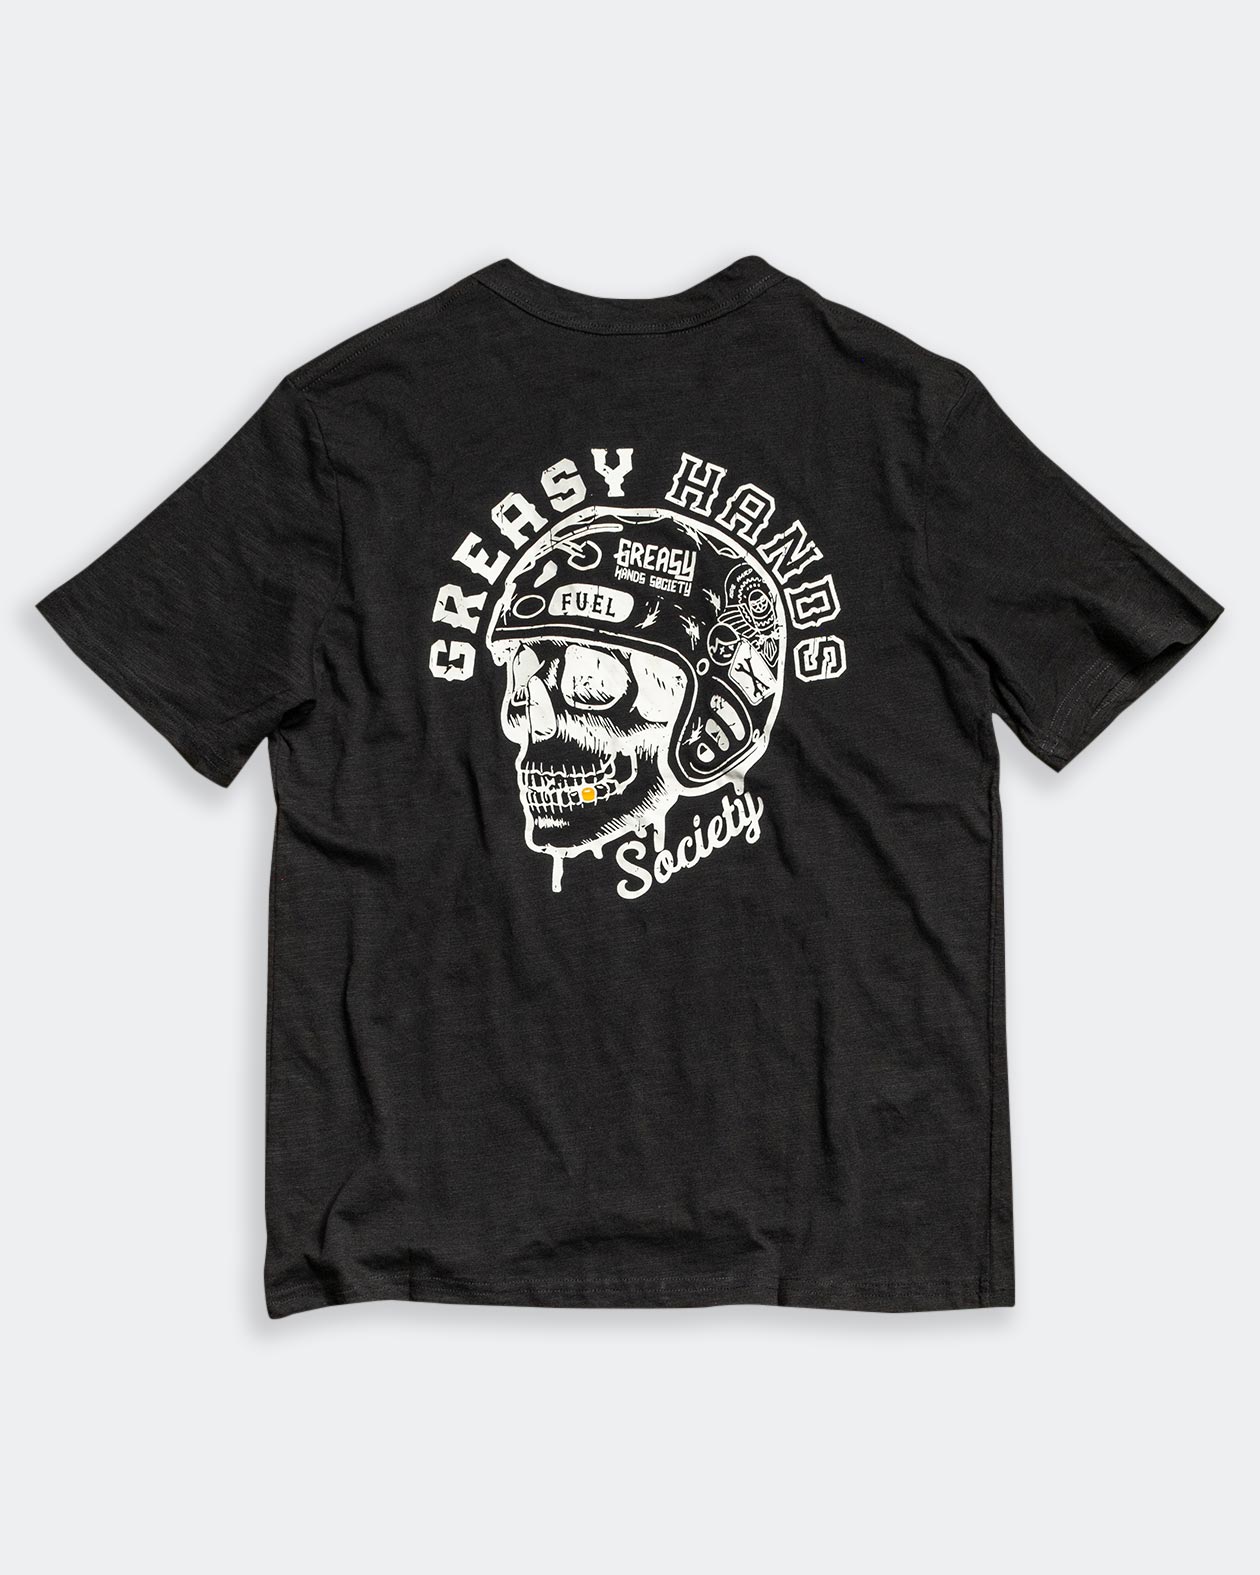 greasy hands society helmet on a skull on a black tshirt back side of a graphic tee